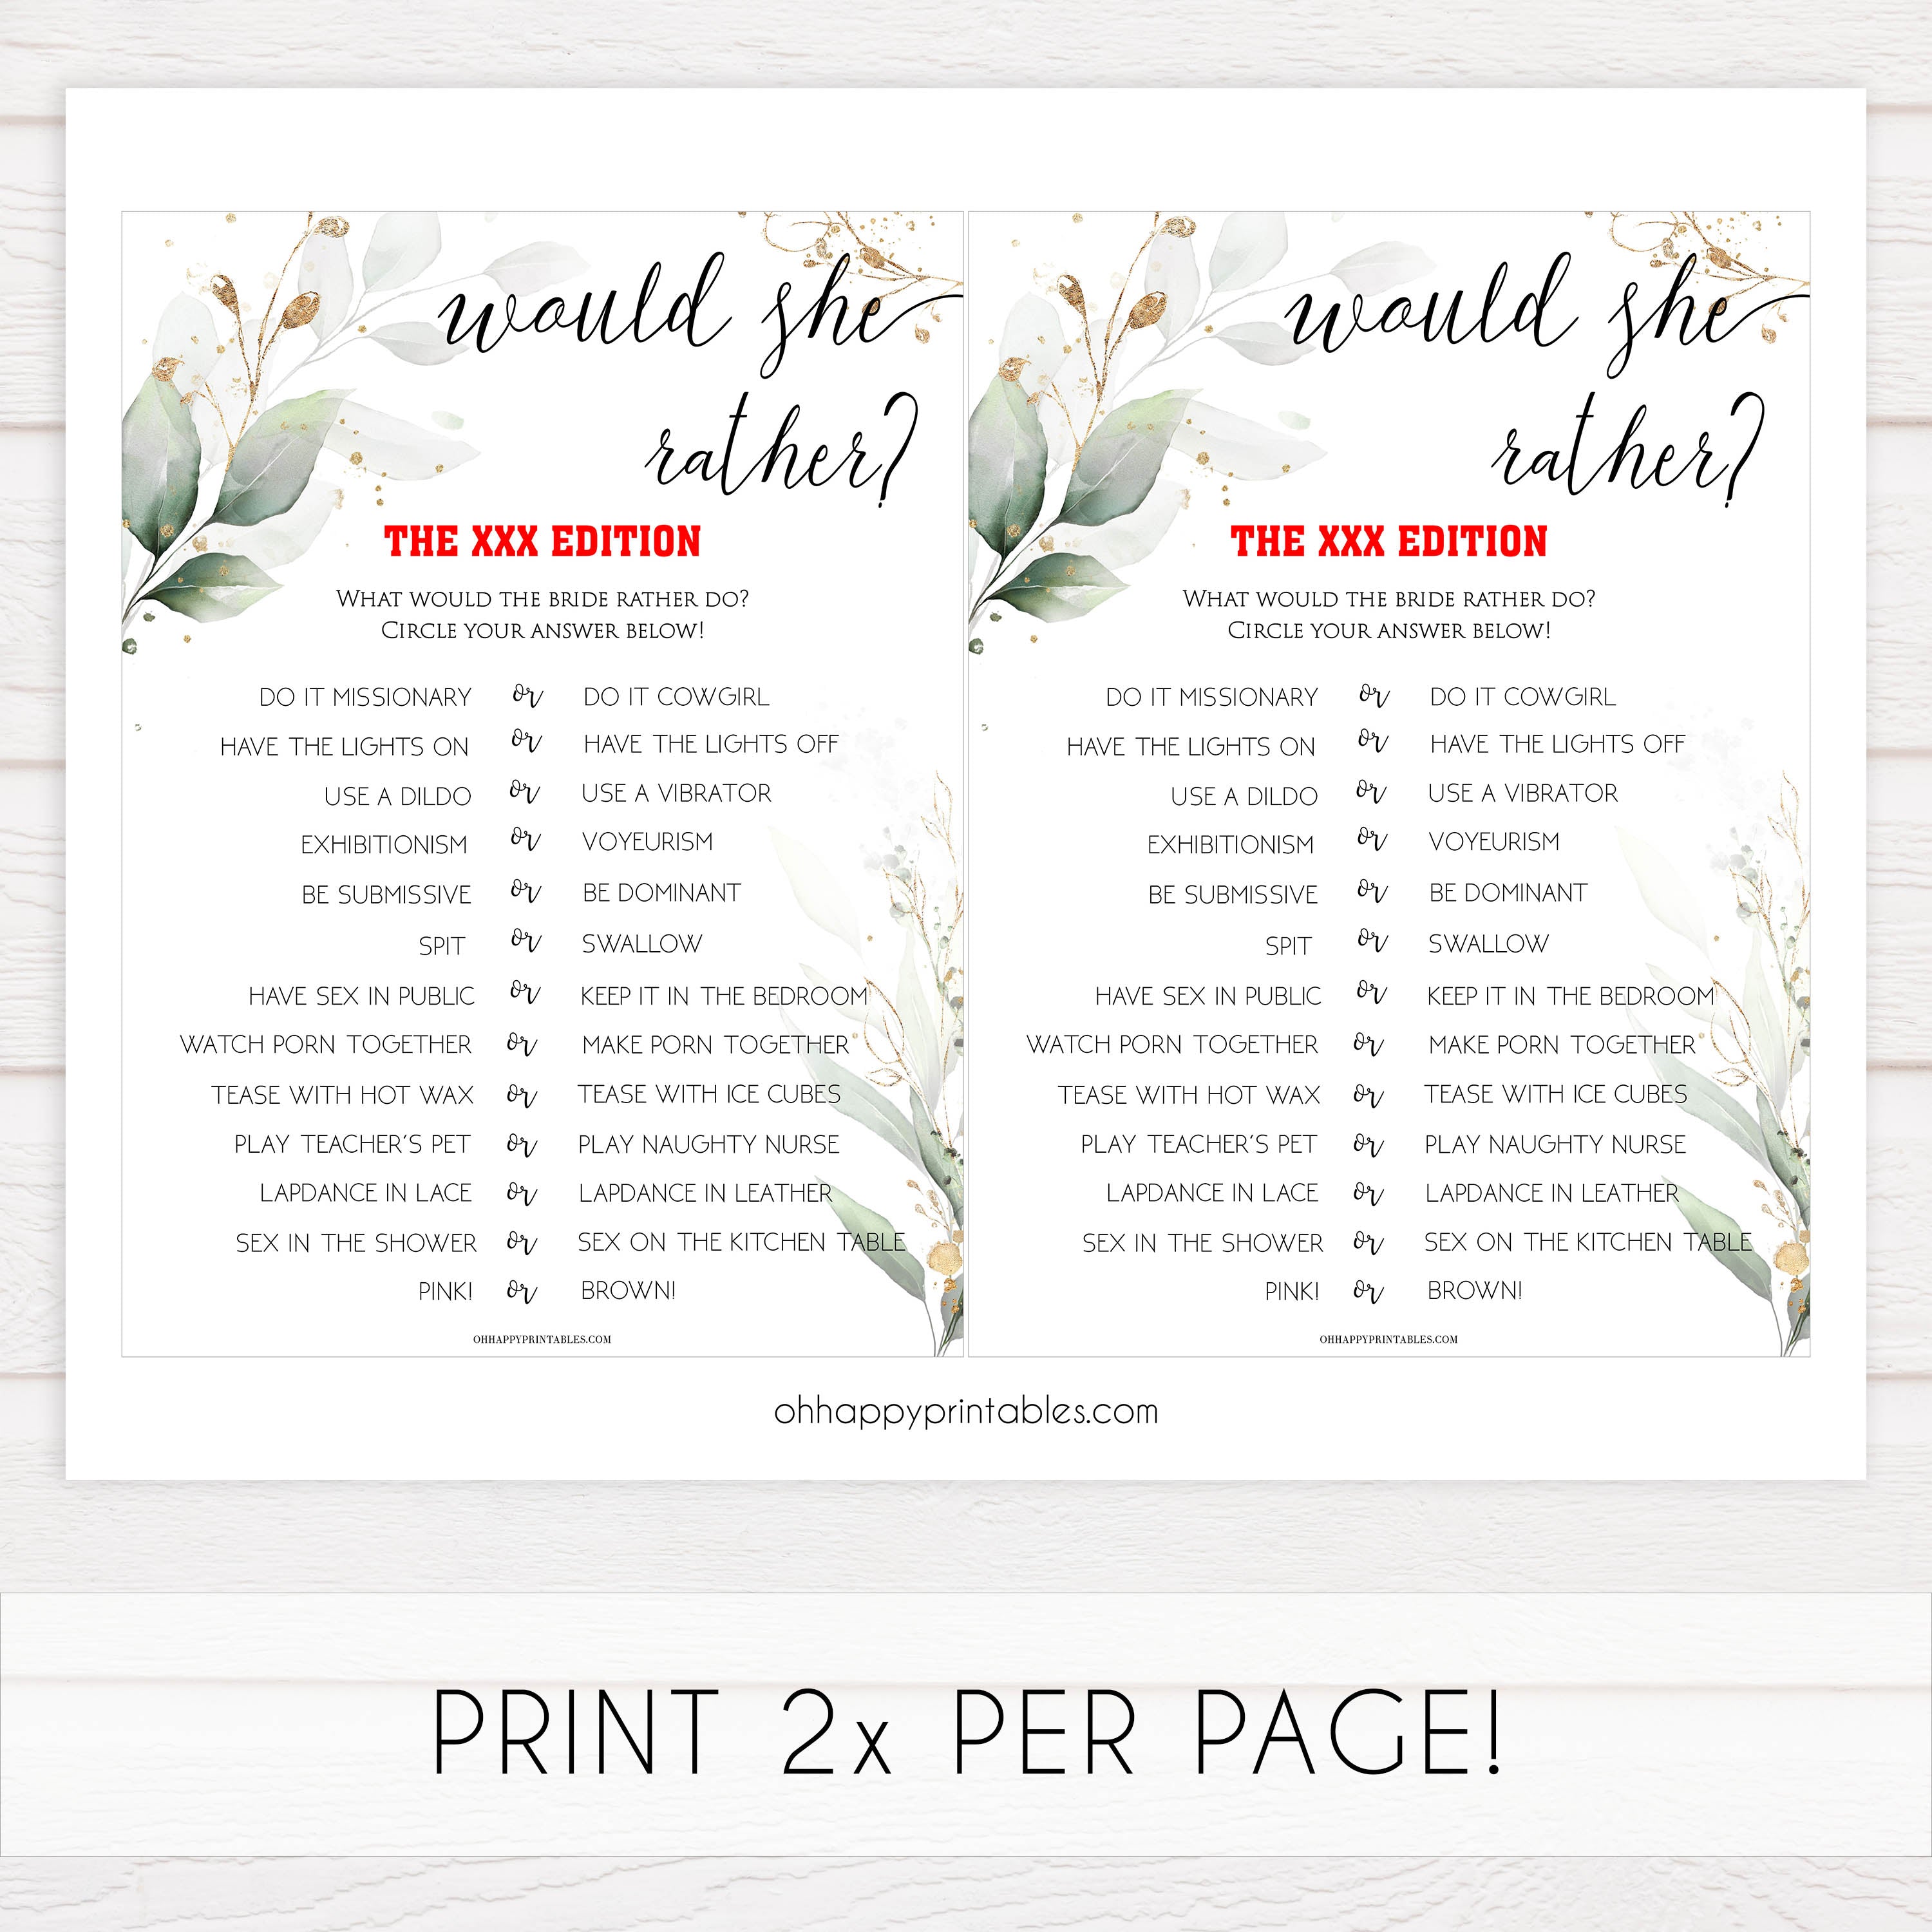 naughty would she rather game, Printable bachelorette games, greenery bachelorette, gold leaf hen party games, fun hen party games, bachelorette game ideas, greenery adult party games, naughty hen games, naughty bachelorette games